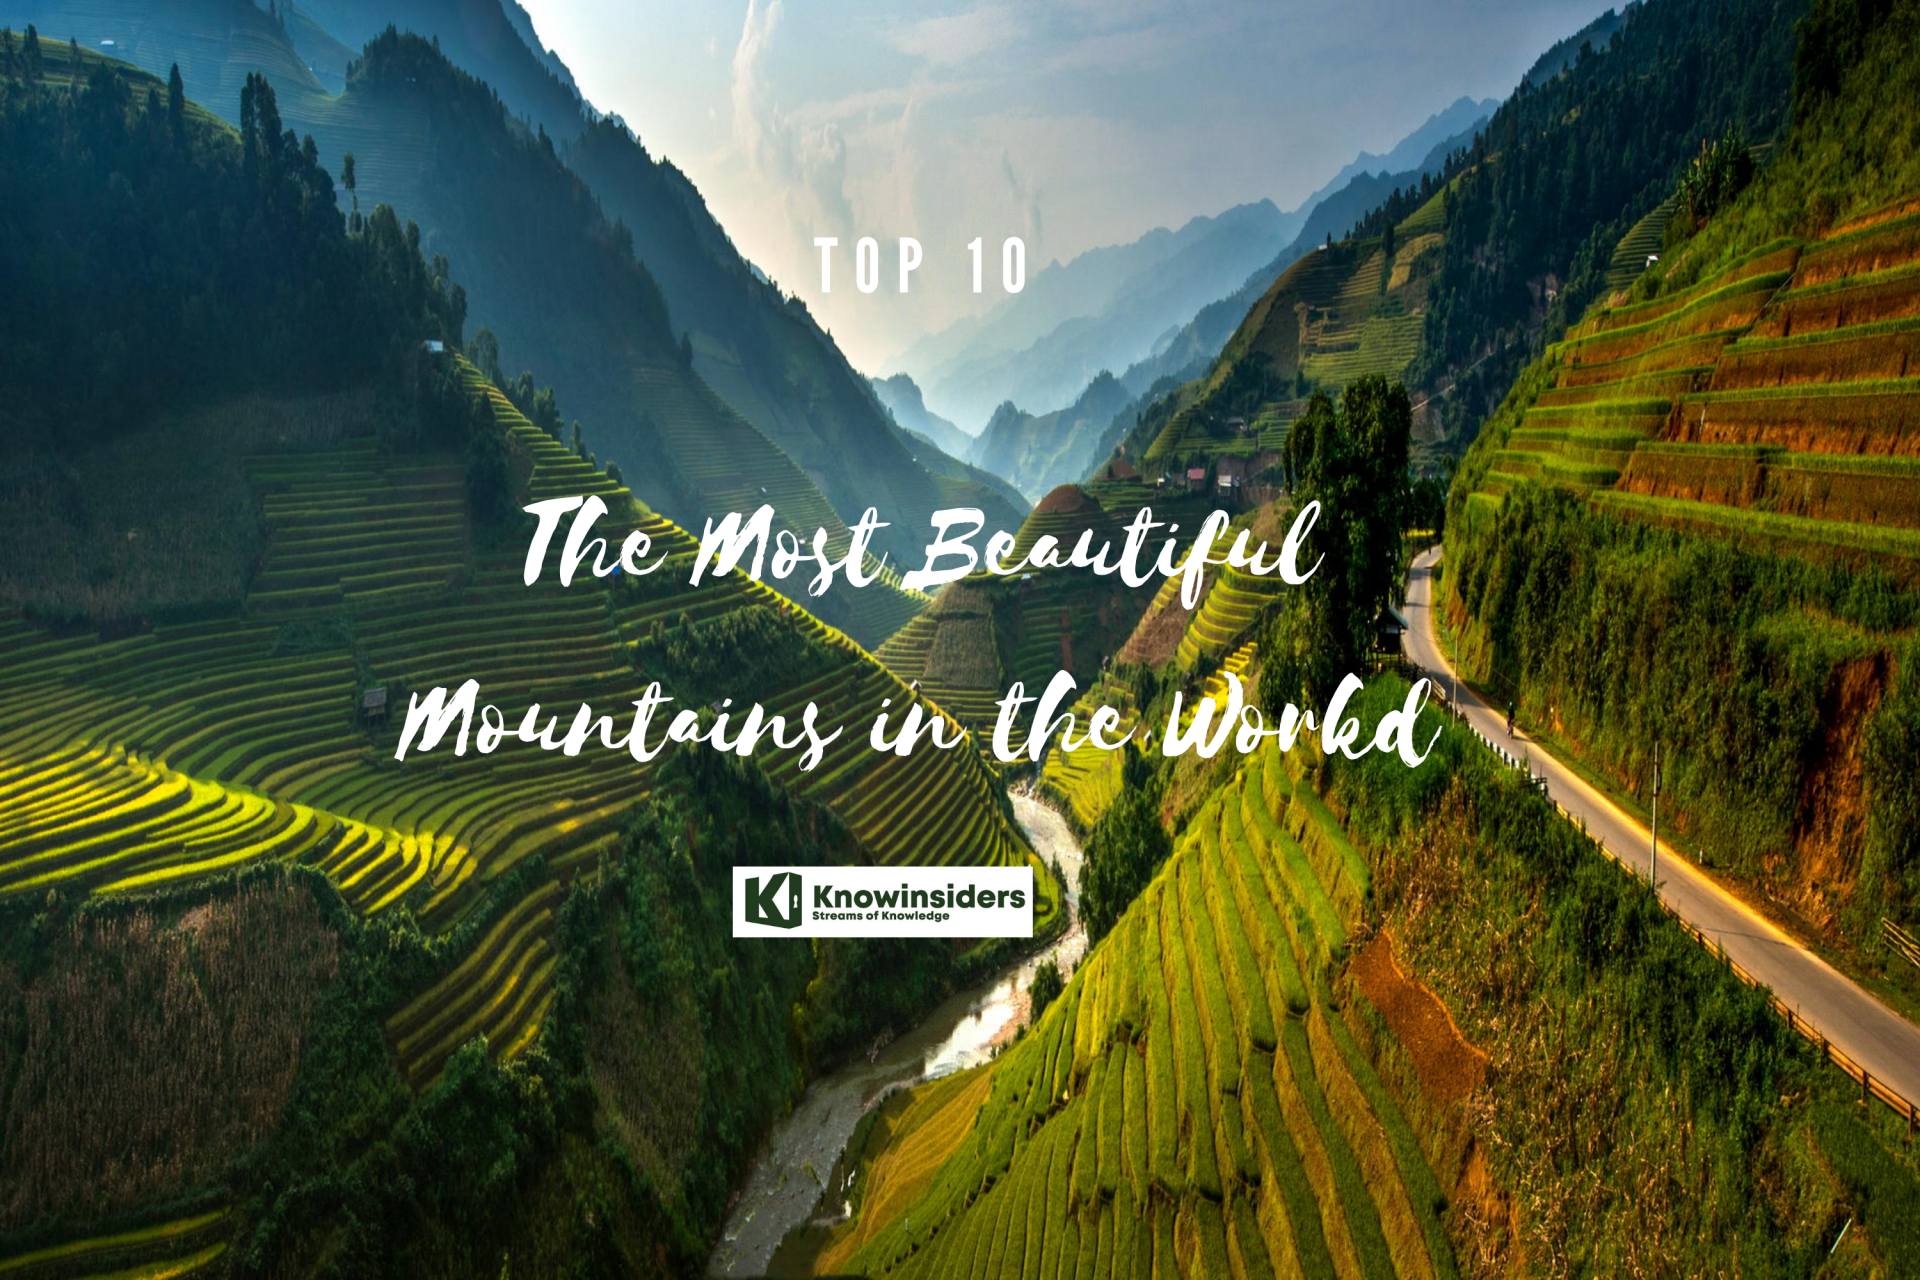 Top 10 Most Beautiful Mountains in the World